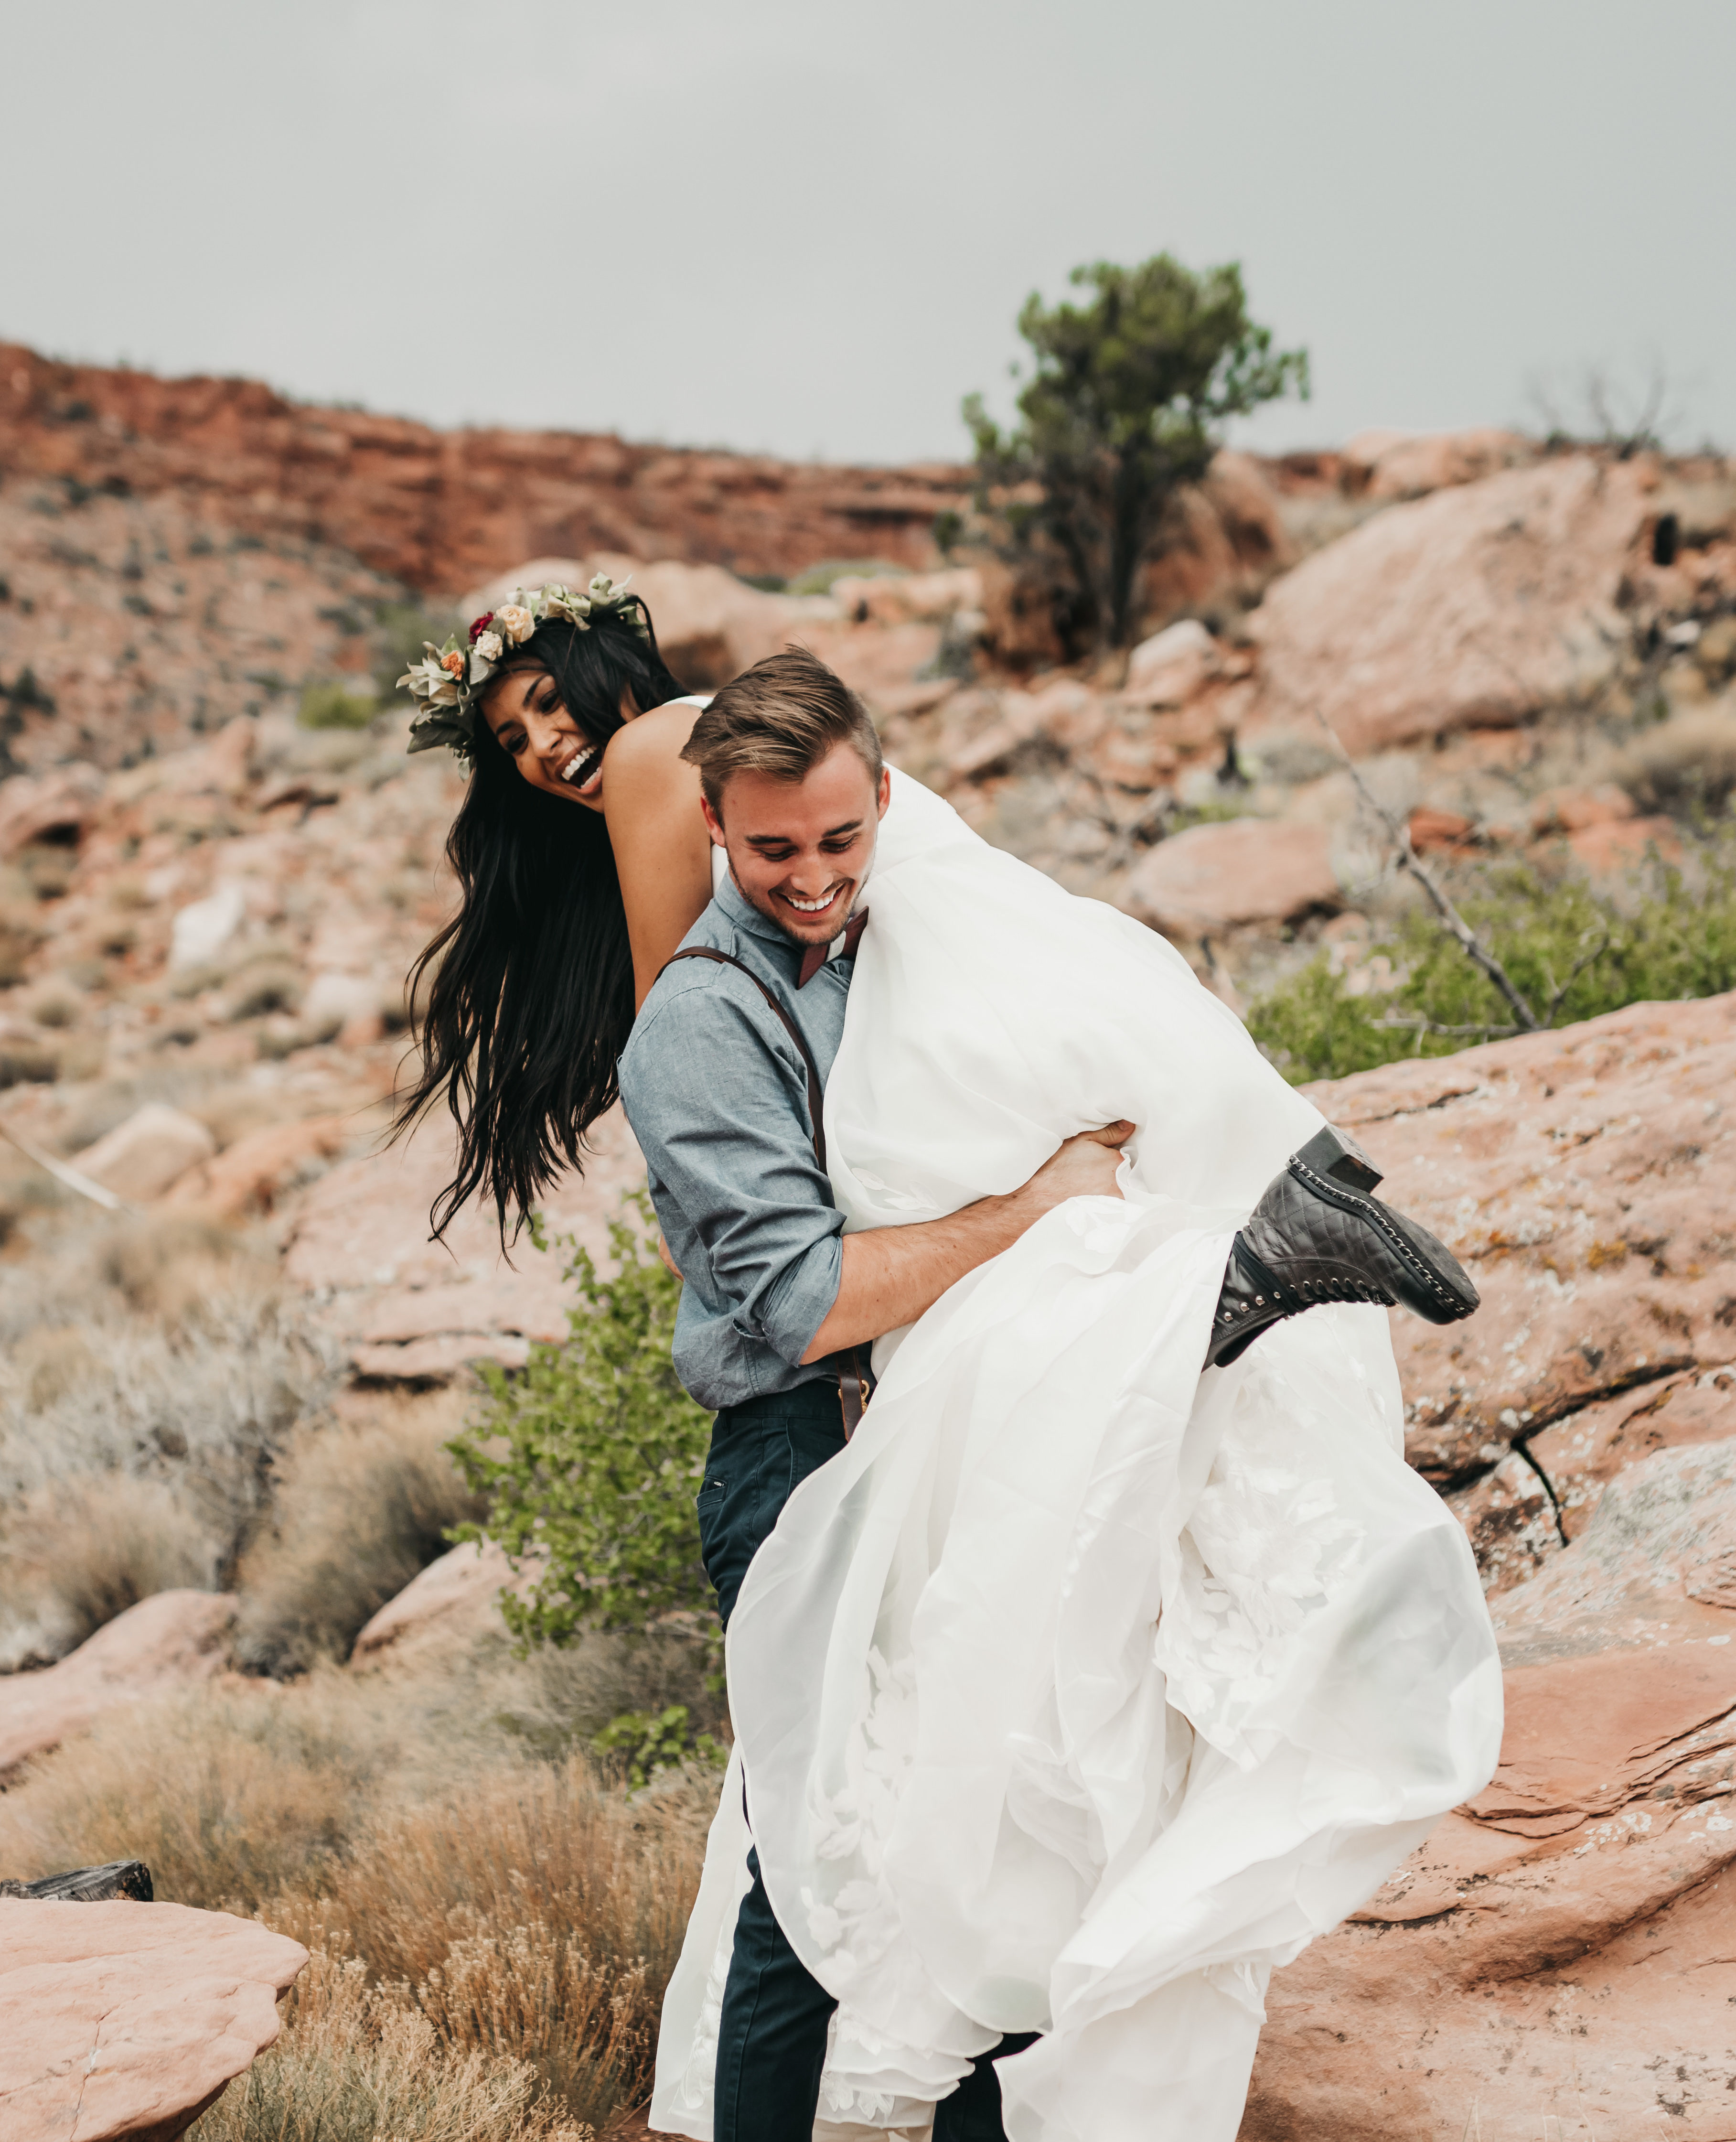 Candid Bridal Portraits after the Edgy Elopement in Sedona